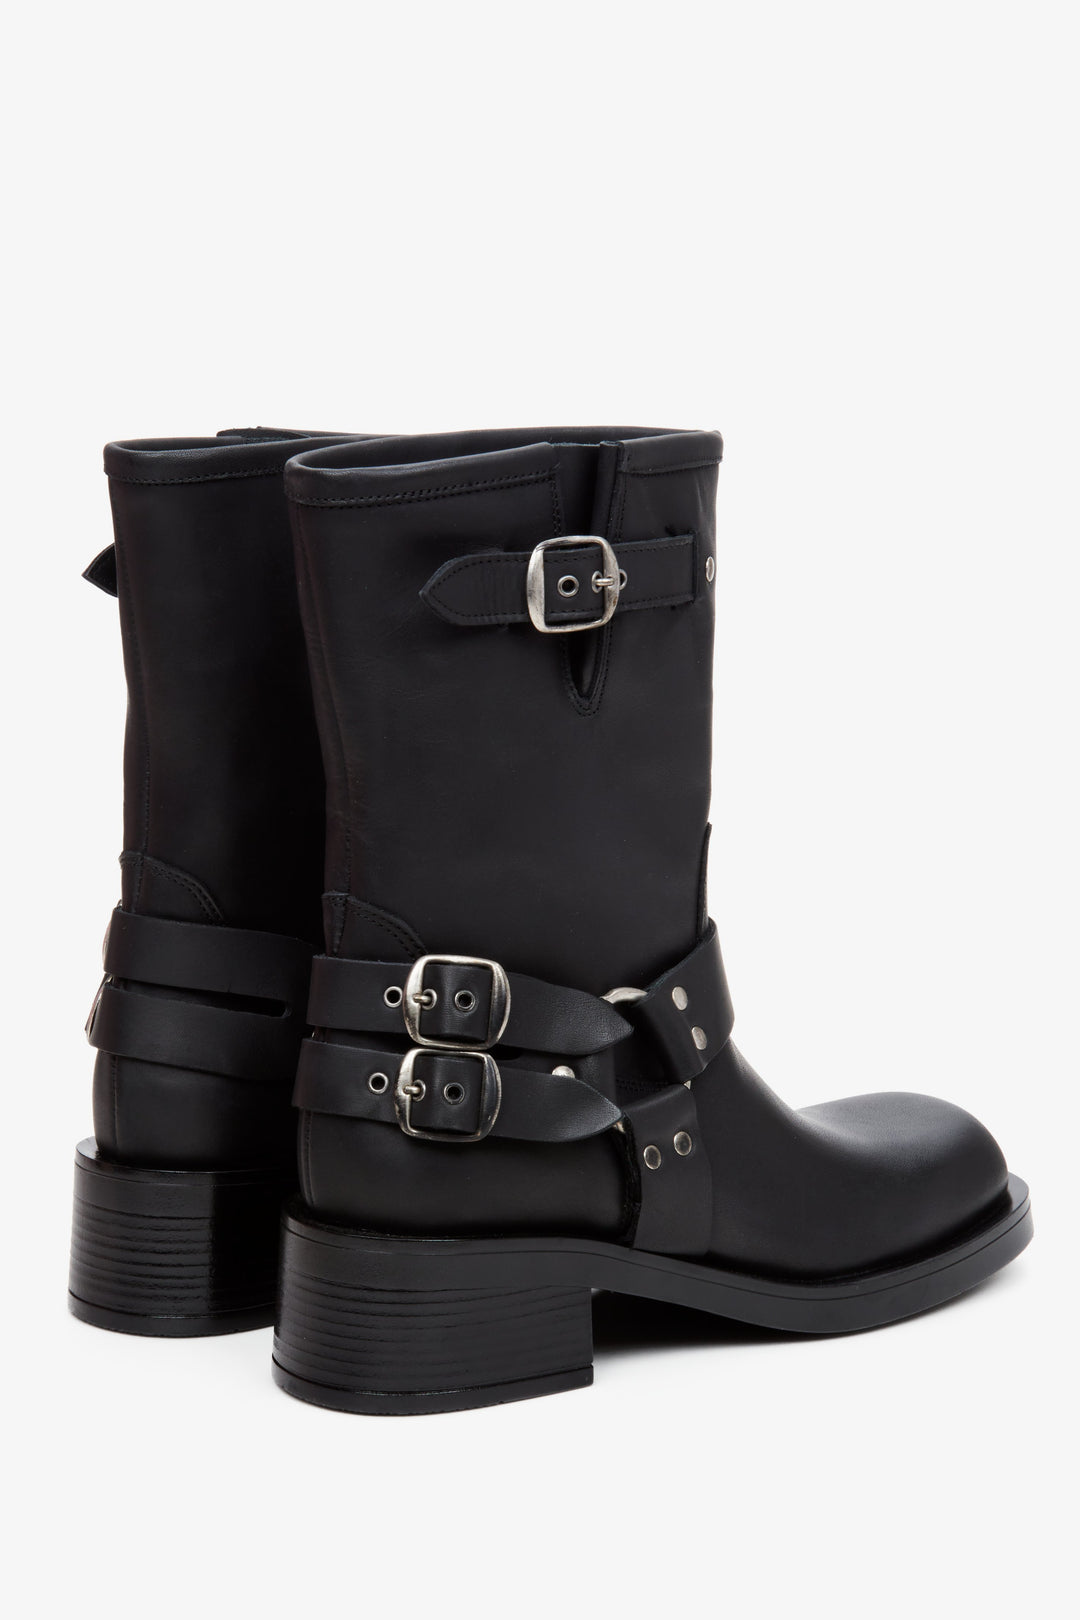 Women's leather boots with jet embellishments by Estro - close-up on the heel and side line of the boots.